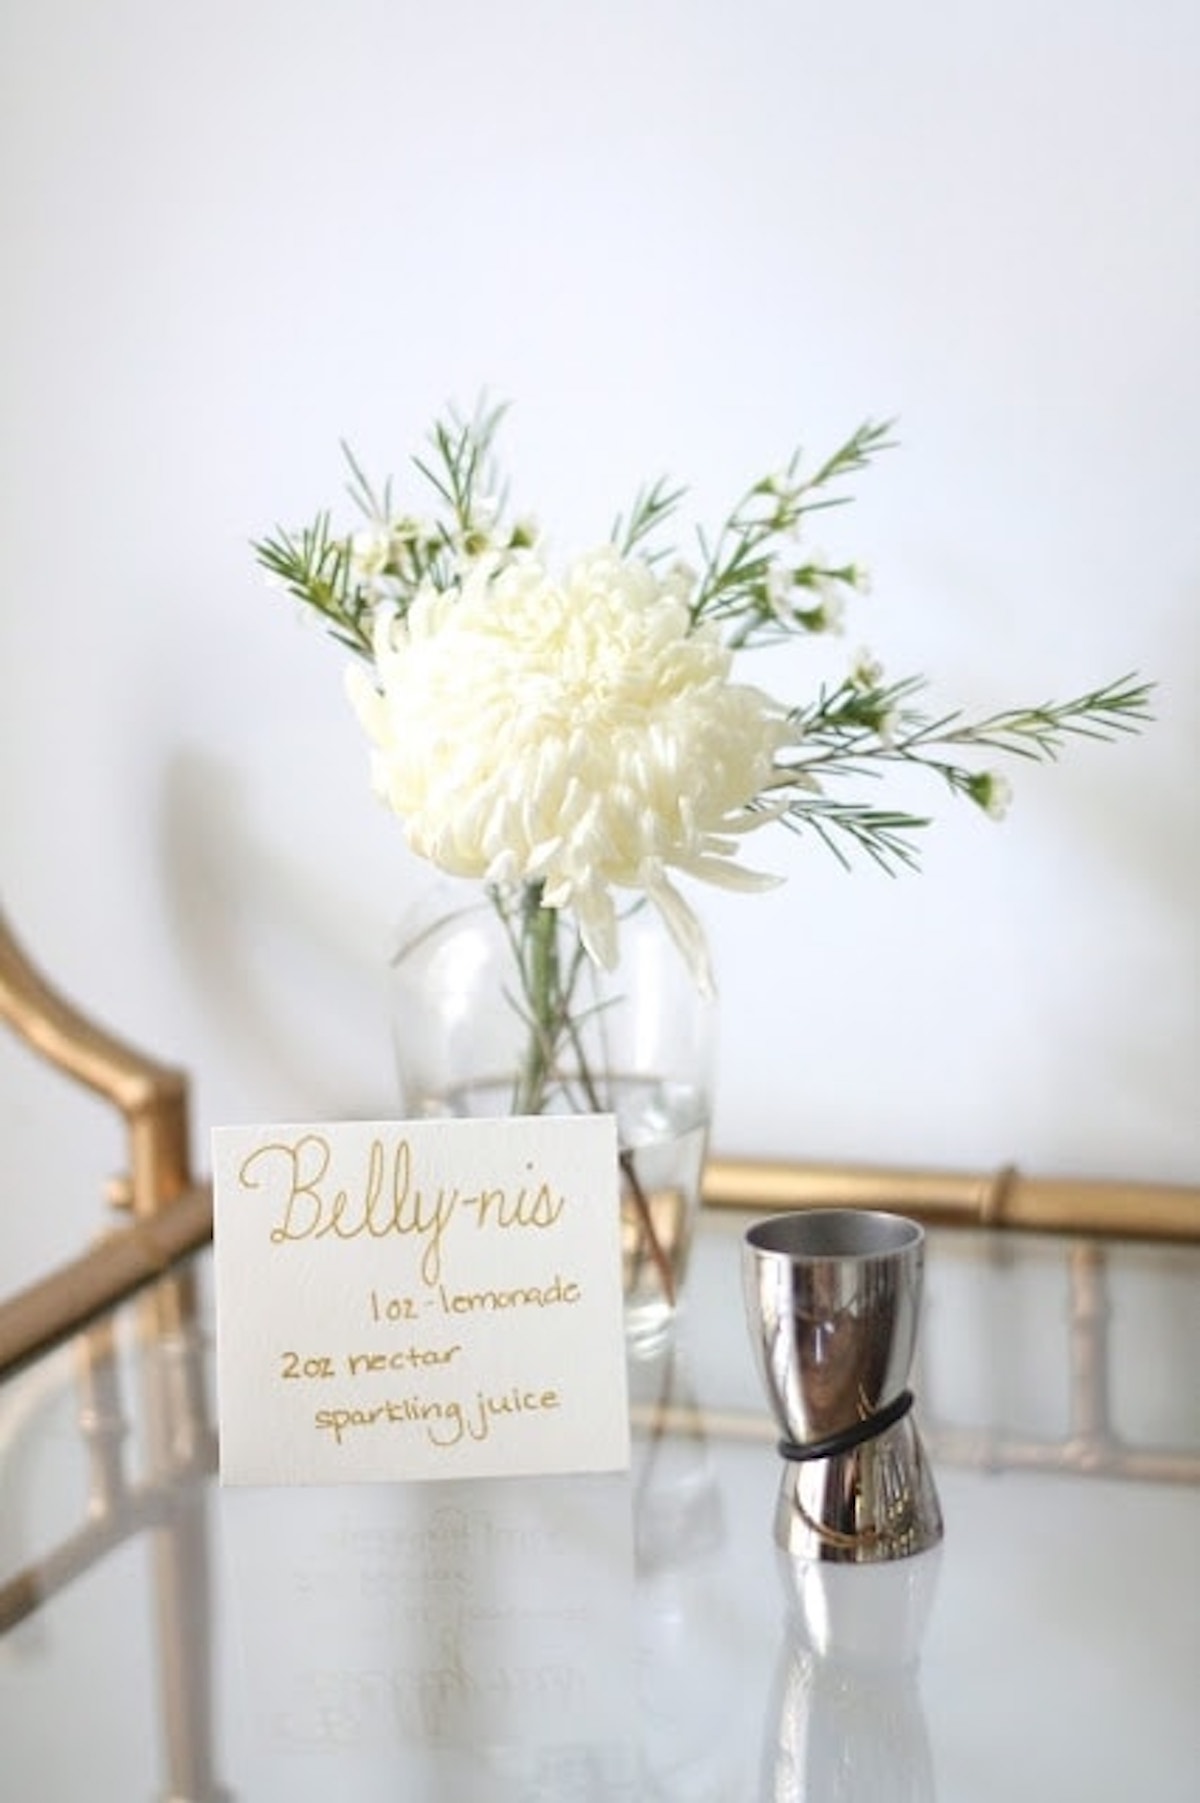 A flower arrangement with white flowers and green stems is in a glass vase on a reflective surface next to a stainless steel jigger and a recipe card for a Non-Alcoholic Bellini, perfect for a baby shower mocktail.